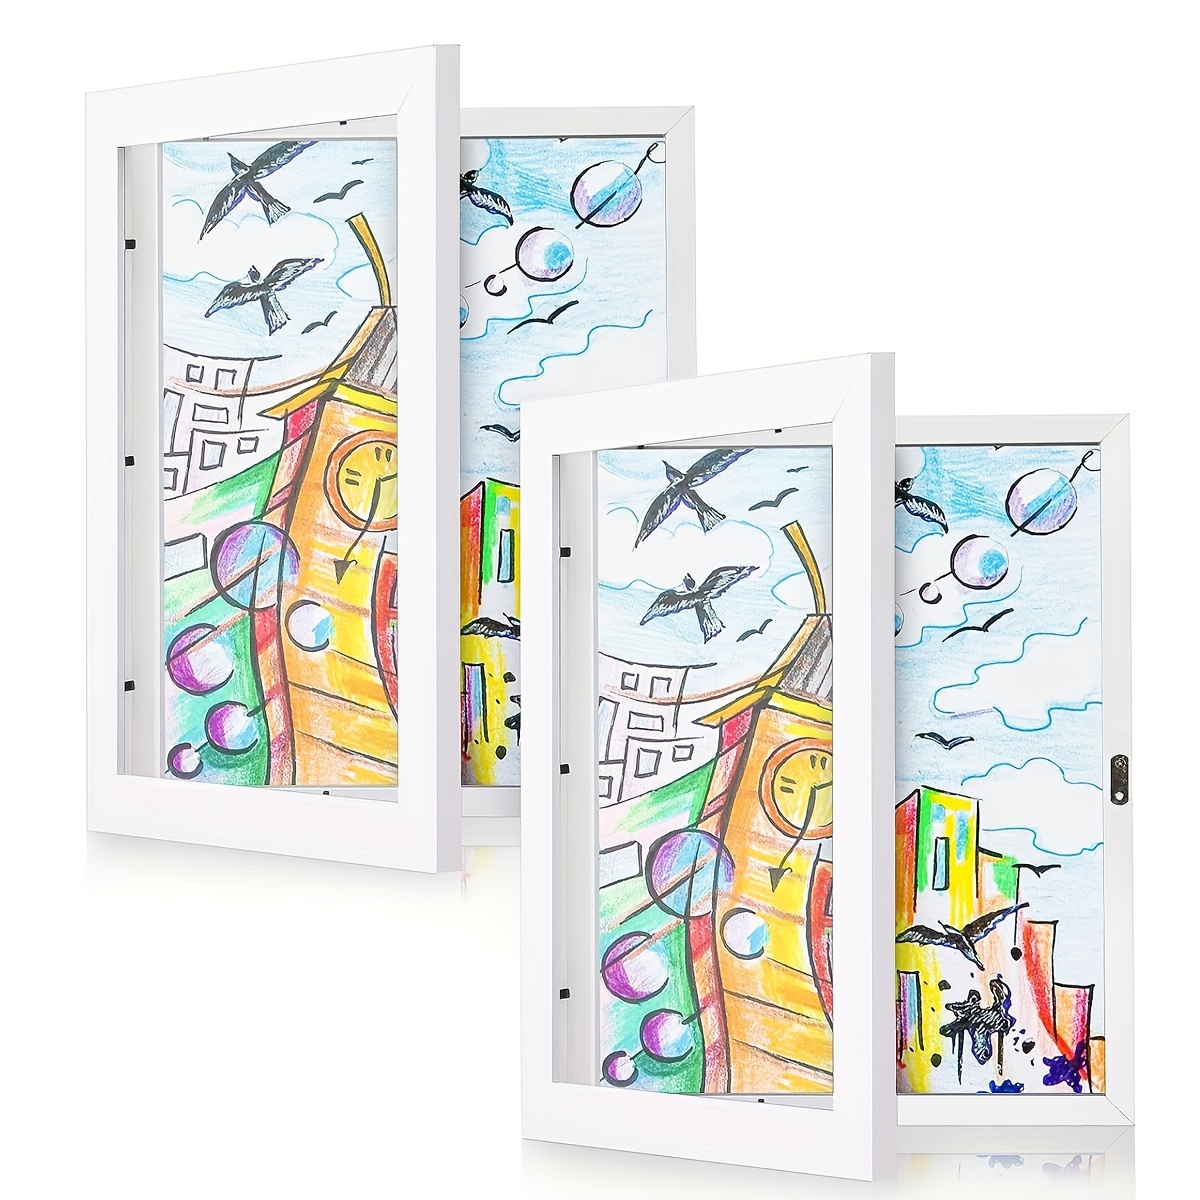 

2pcs, Art Frames, Wooden Wall-mounted Flip Frame Display, Modern Transparent Glass Picture Frames With Magnetic Closure For Artworks, Doodles, Awards, And Certificates, Classic Style